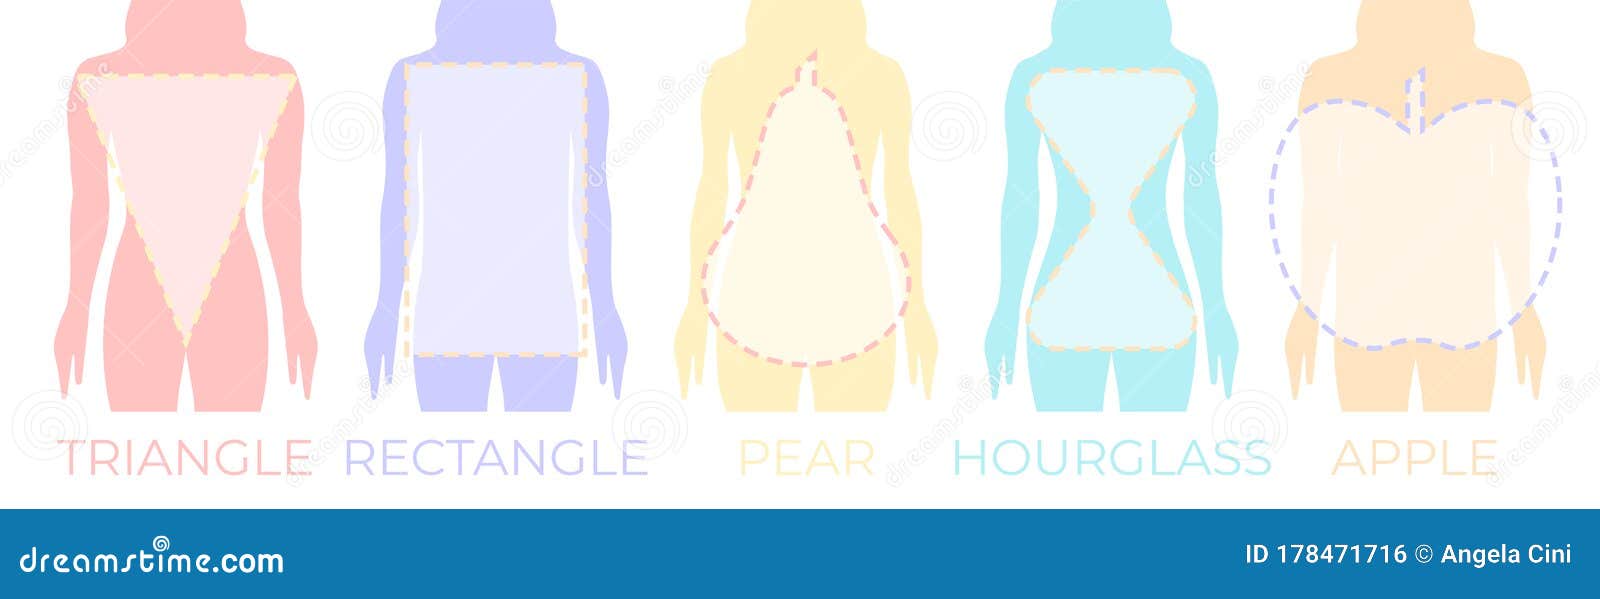 Woman Body Shapes Triangle, Rectangle, Apple, Pear And Hourglass ...